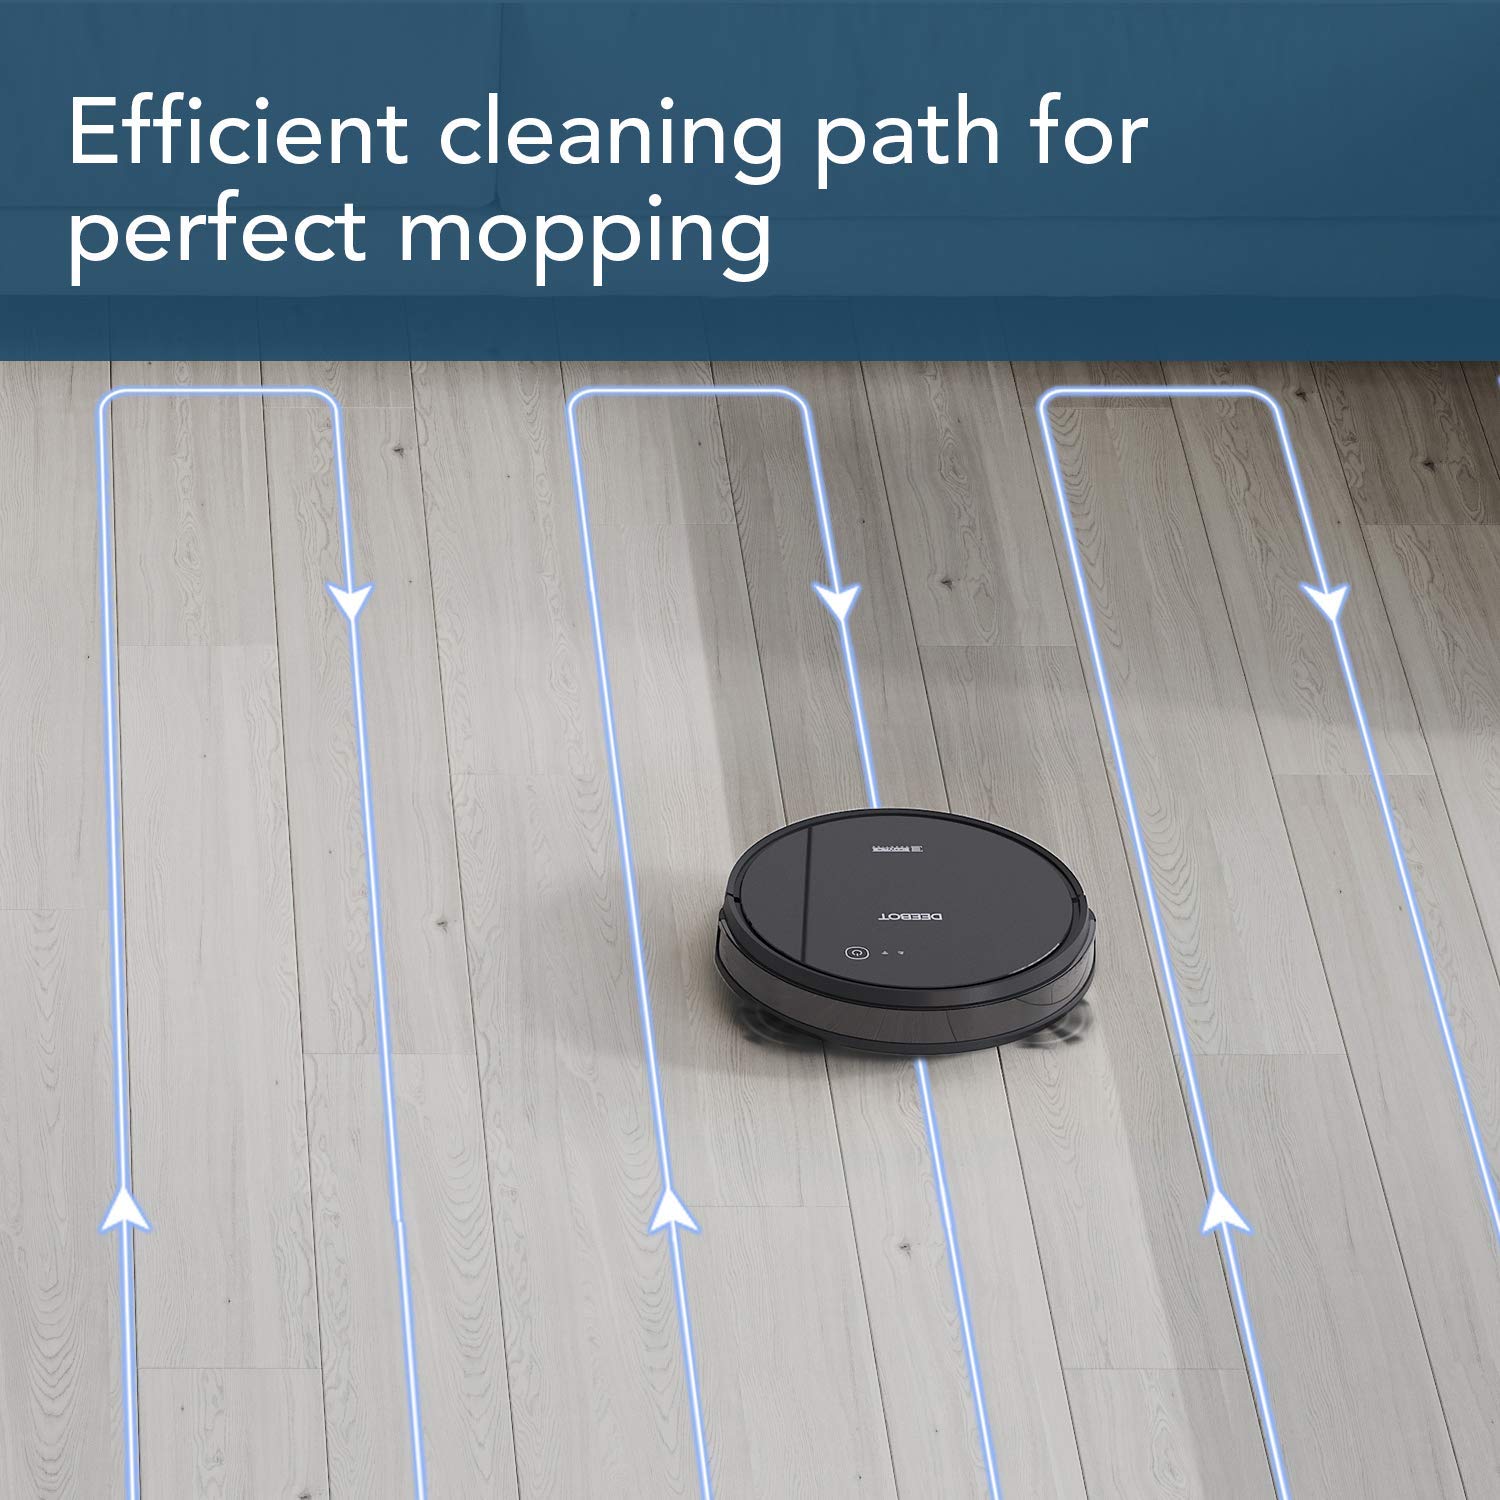 ECOVACS DEEBOT 661 Robot Vacuum Cleaner and Mop, 110 Minute Battery Life - image 4 of 7